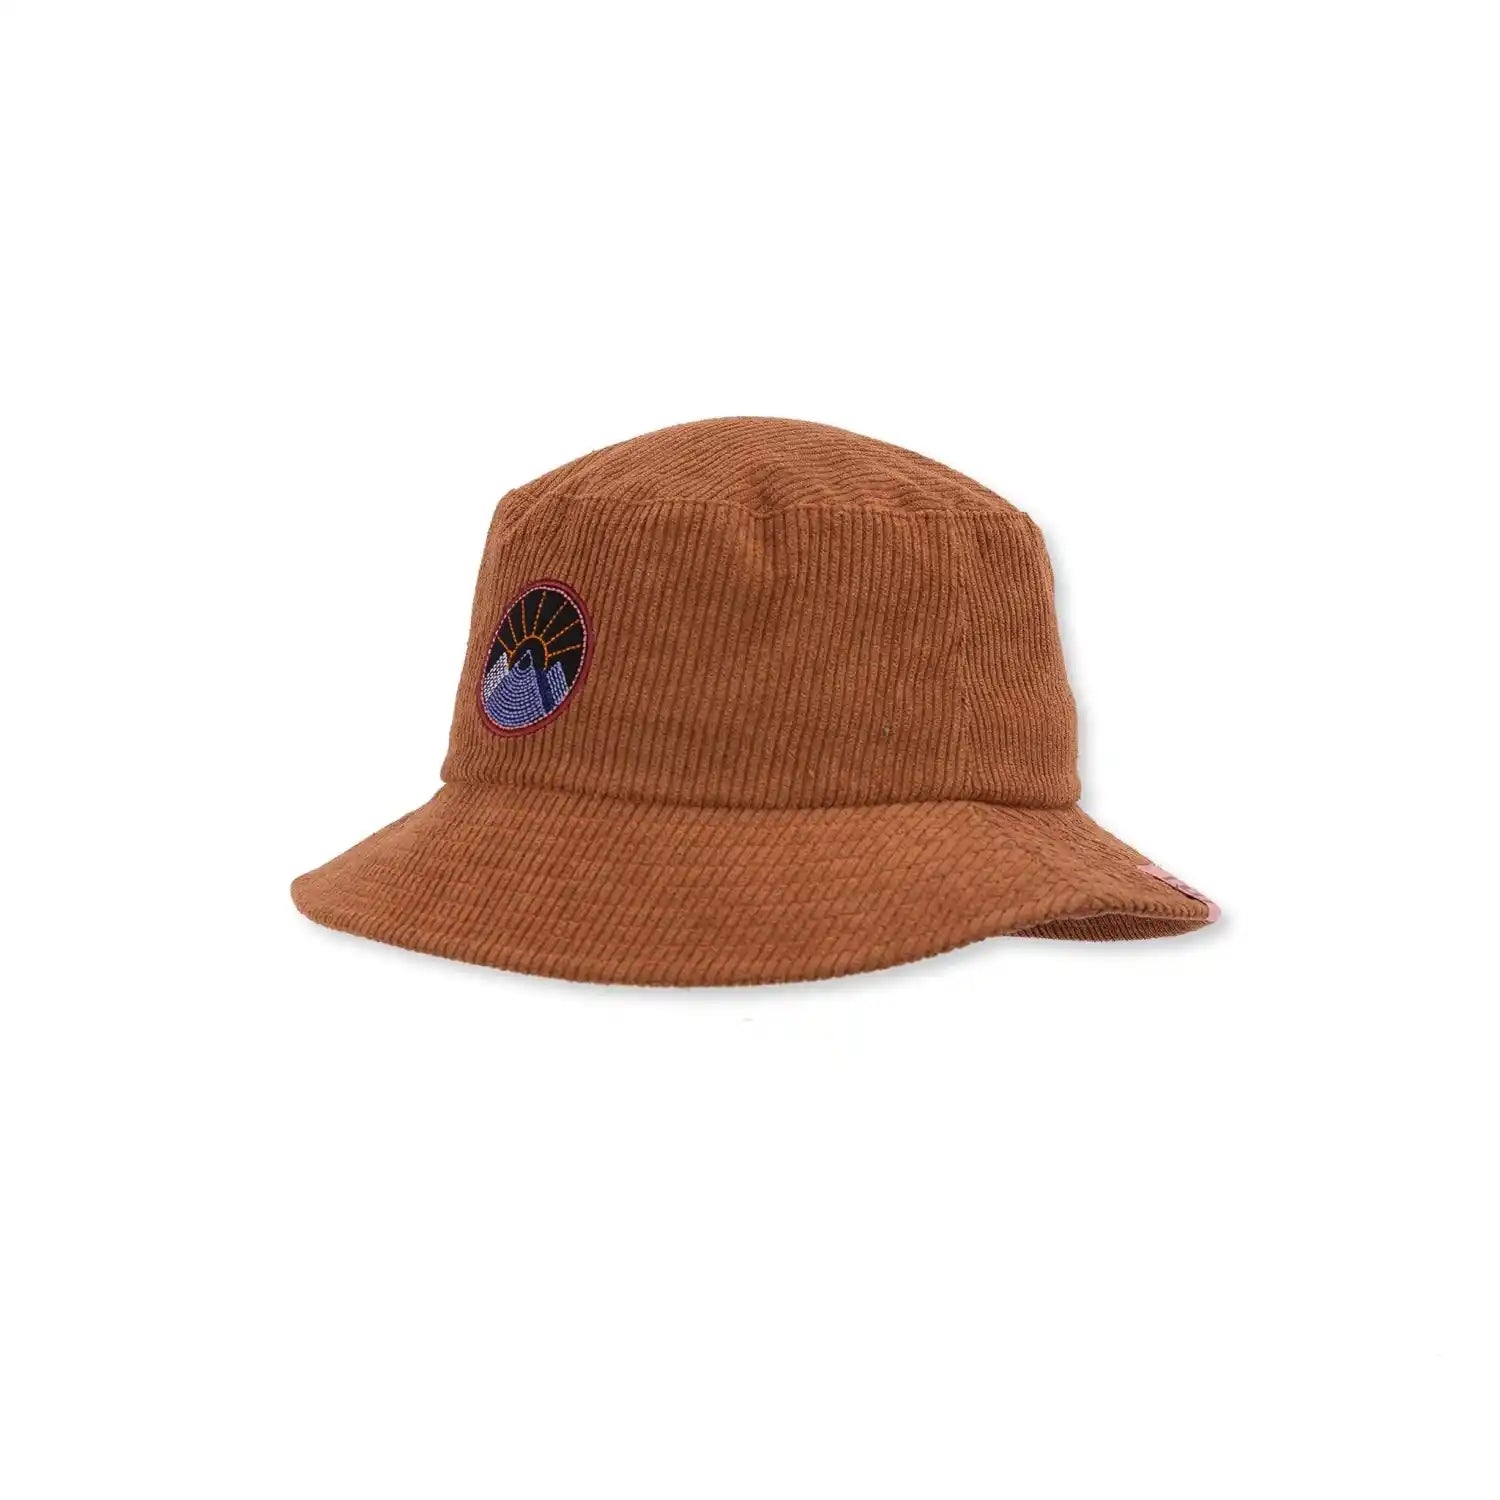 Pistil Bondi Bucket Hat, Chocolate, front and side view 